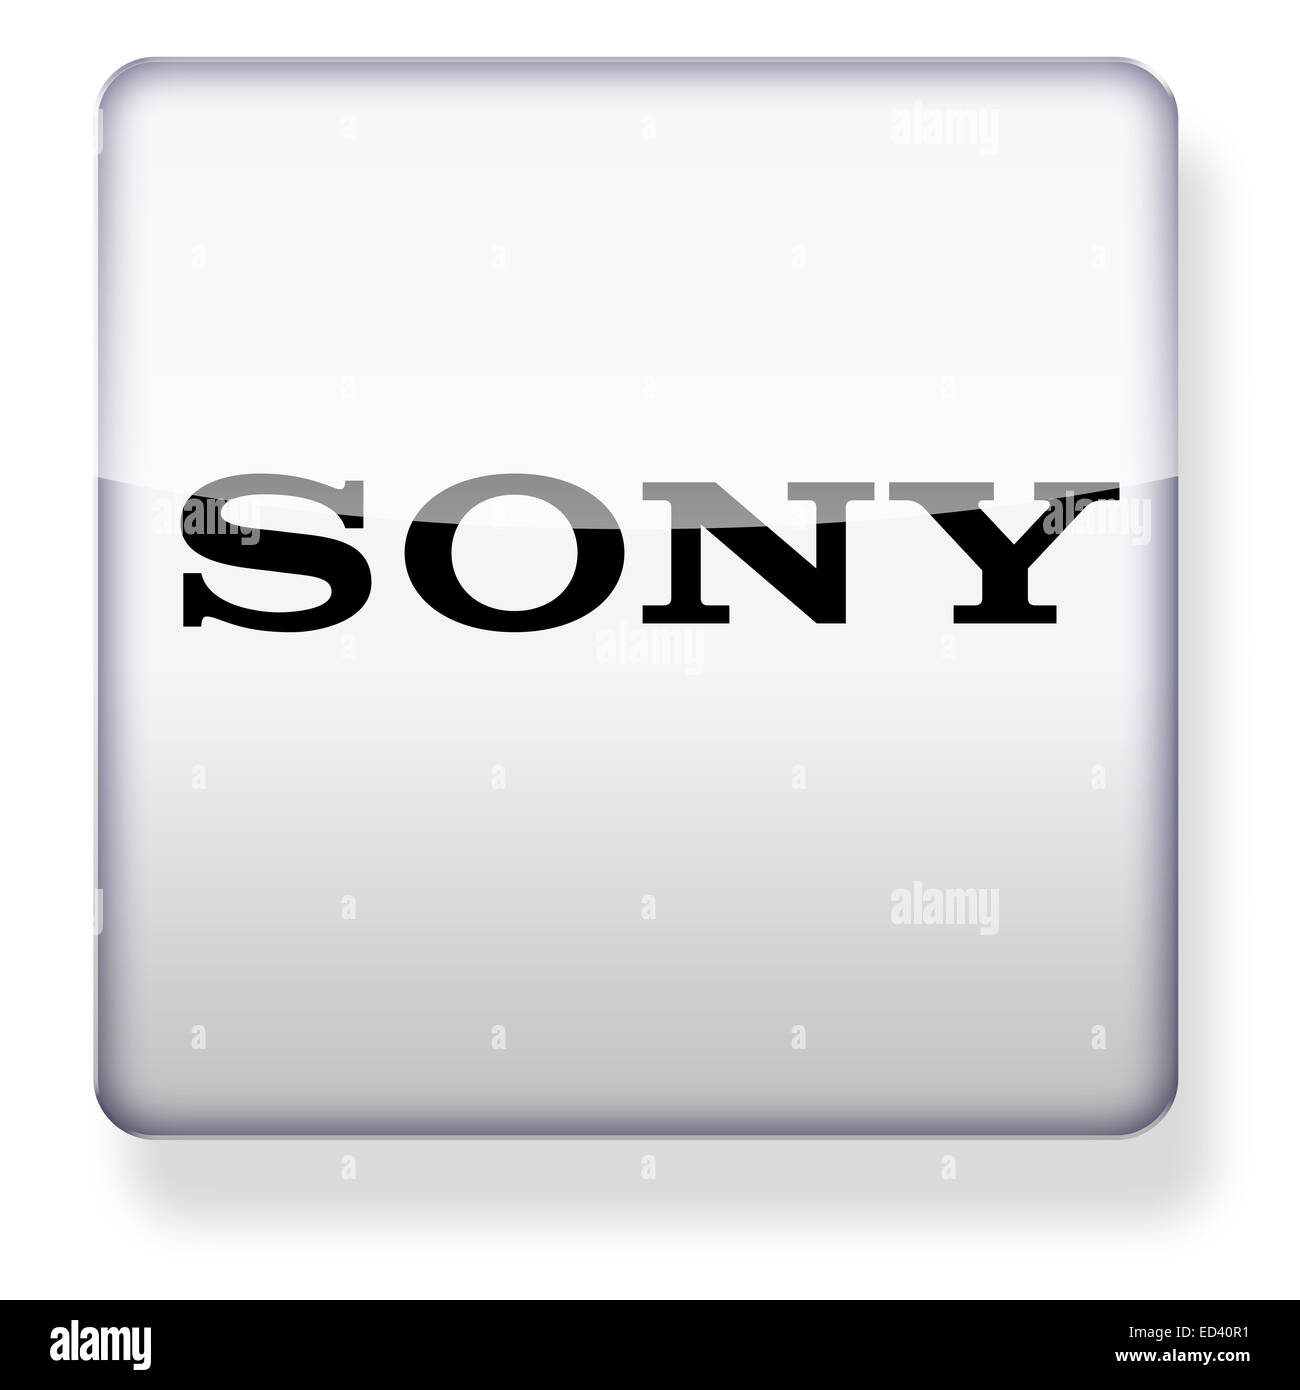 Sony logo as an app icon. Clipping path included. Stock Photo